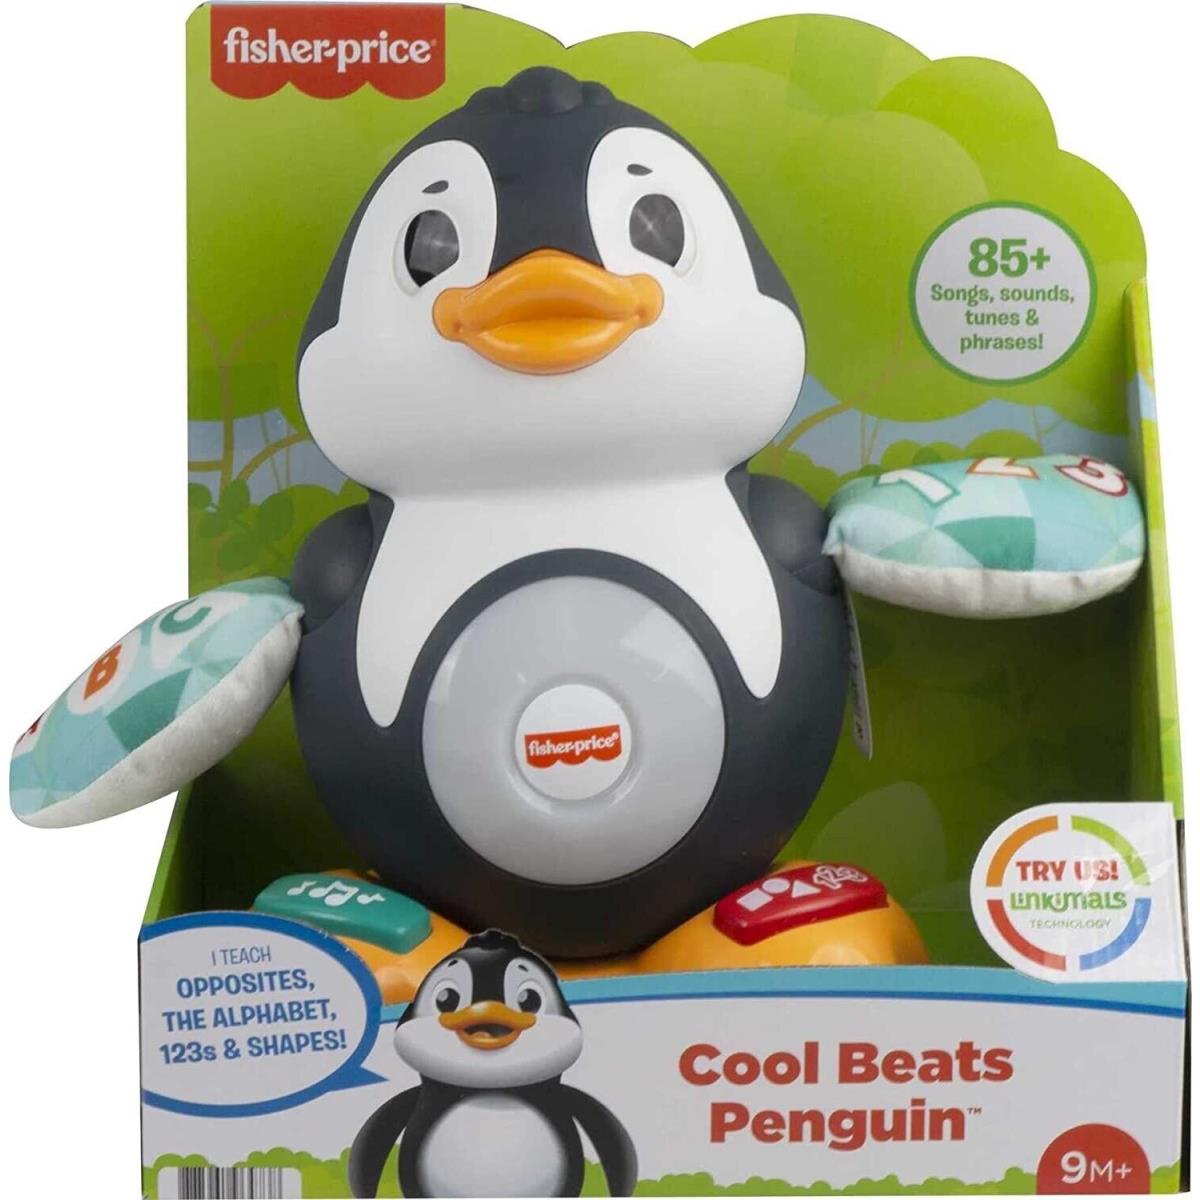 Fisher Price Linkimals Ccol Beats Penguin Musical Infant Toddler Toy with Sounds Gift For Kid